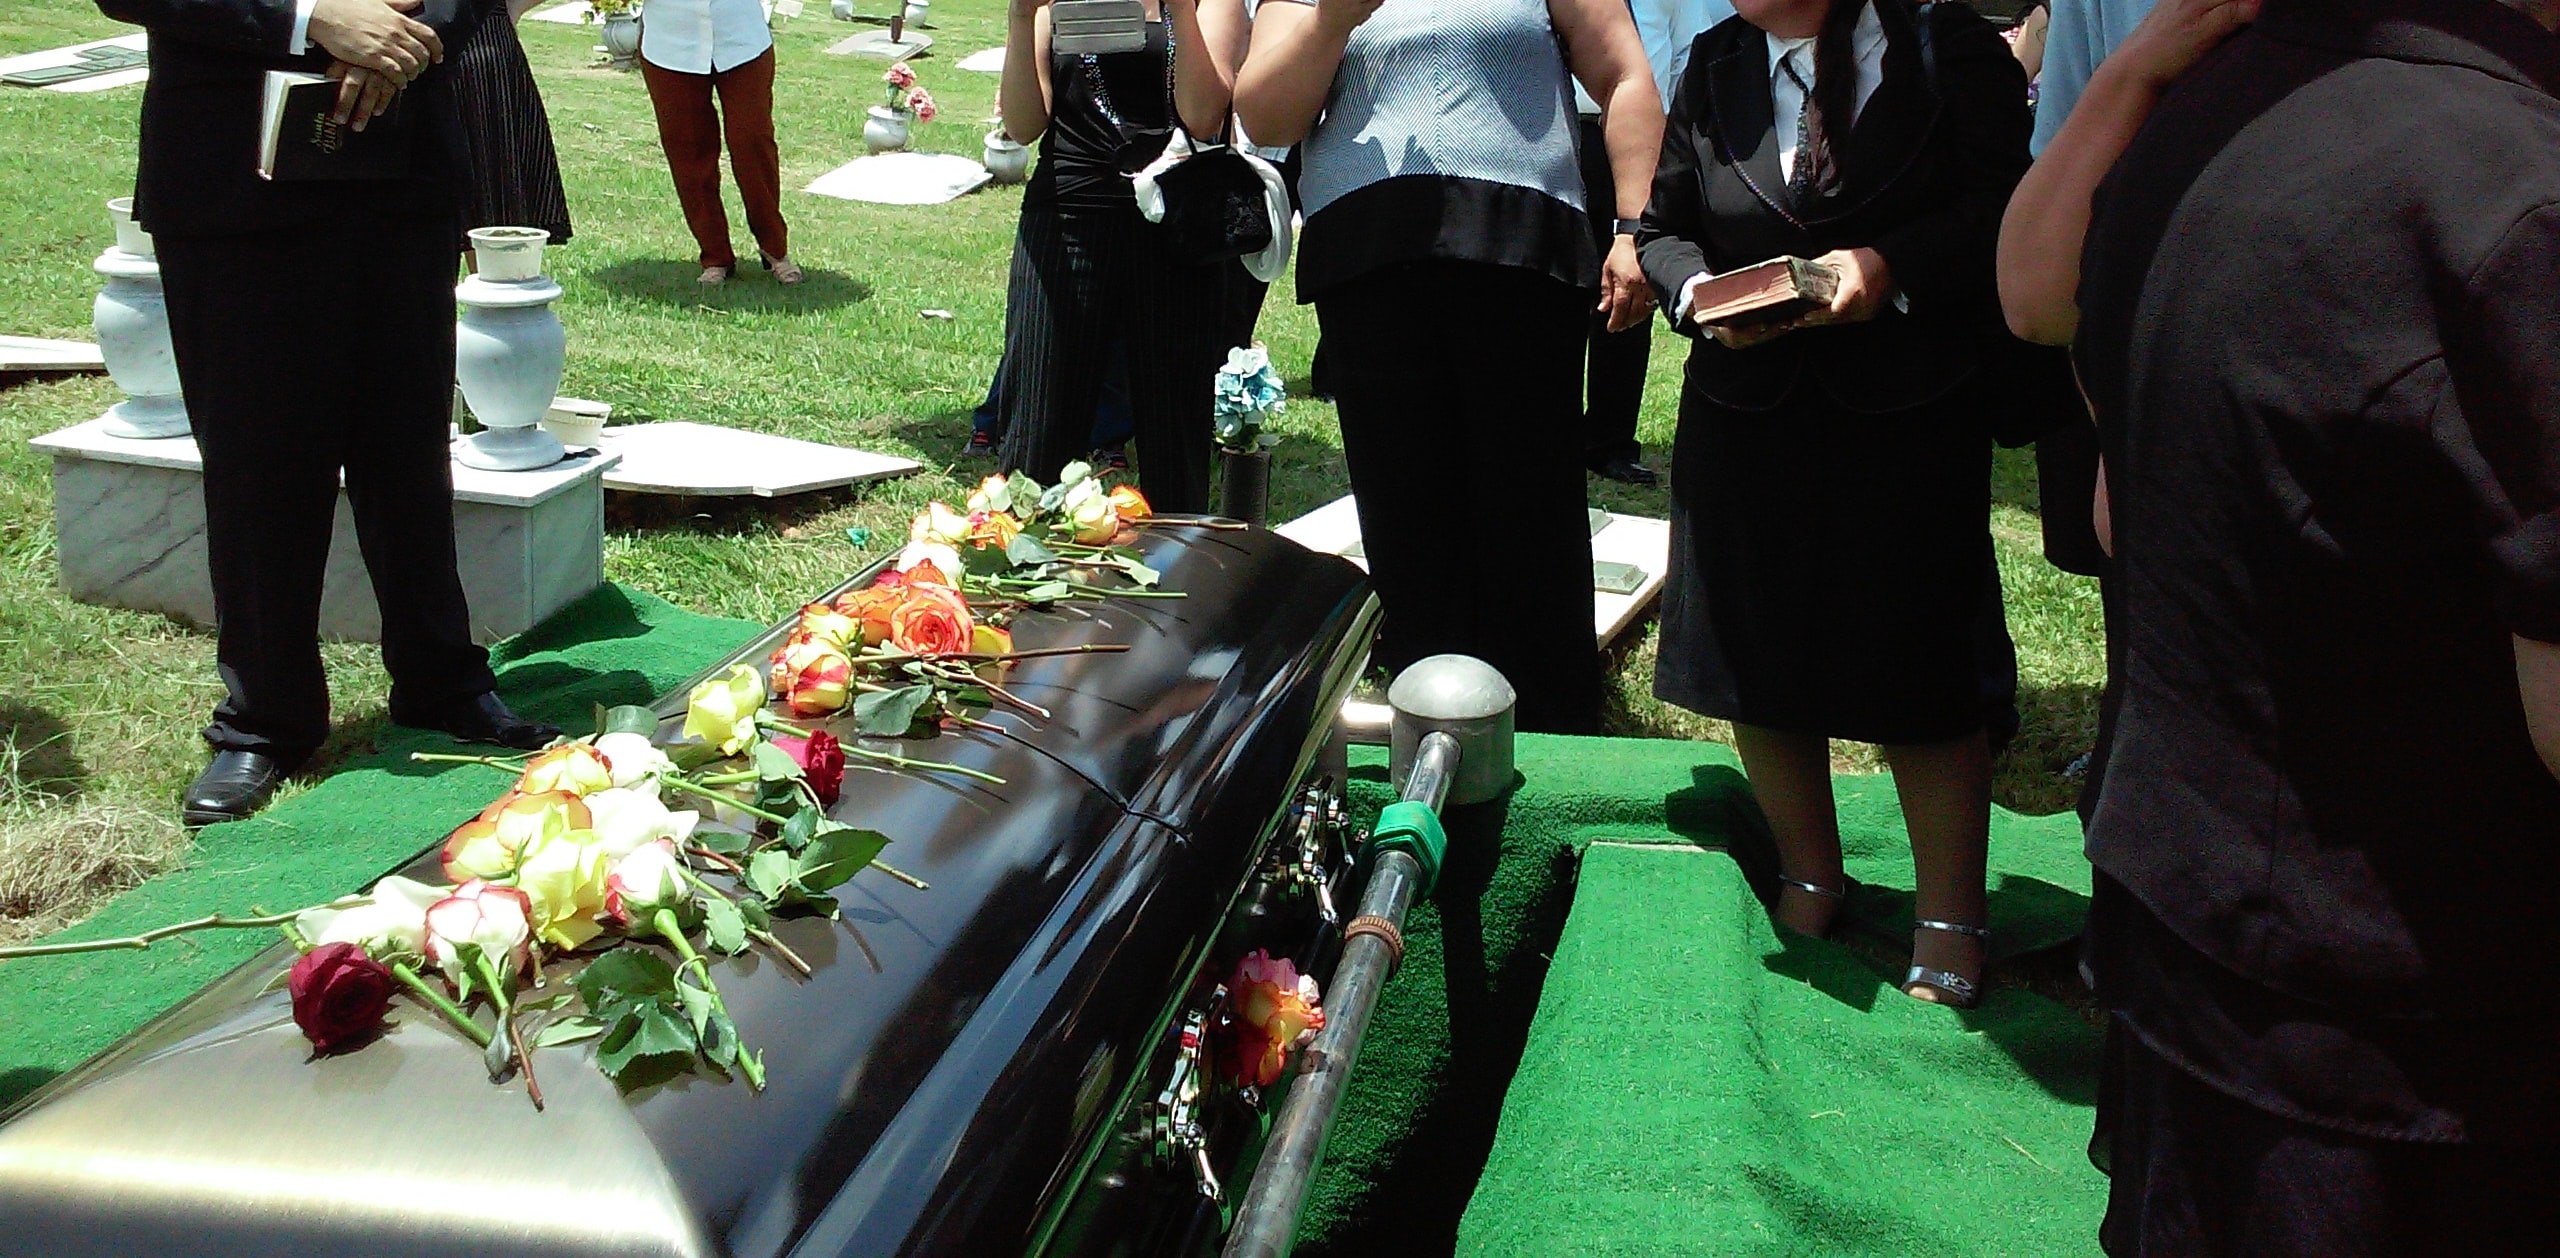 People dressed in black gather around a casket with flowers prepared for burial.